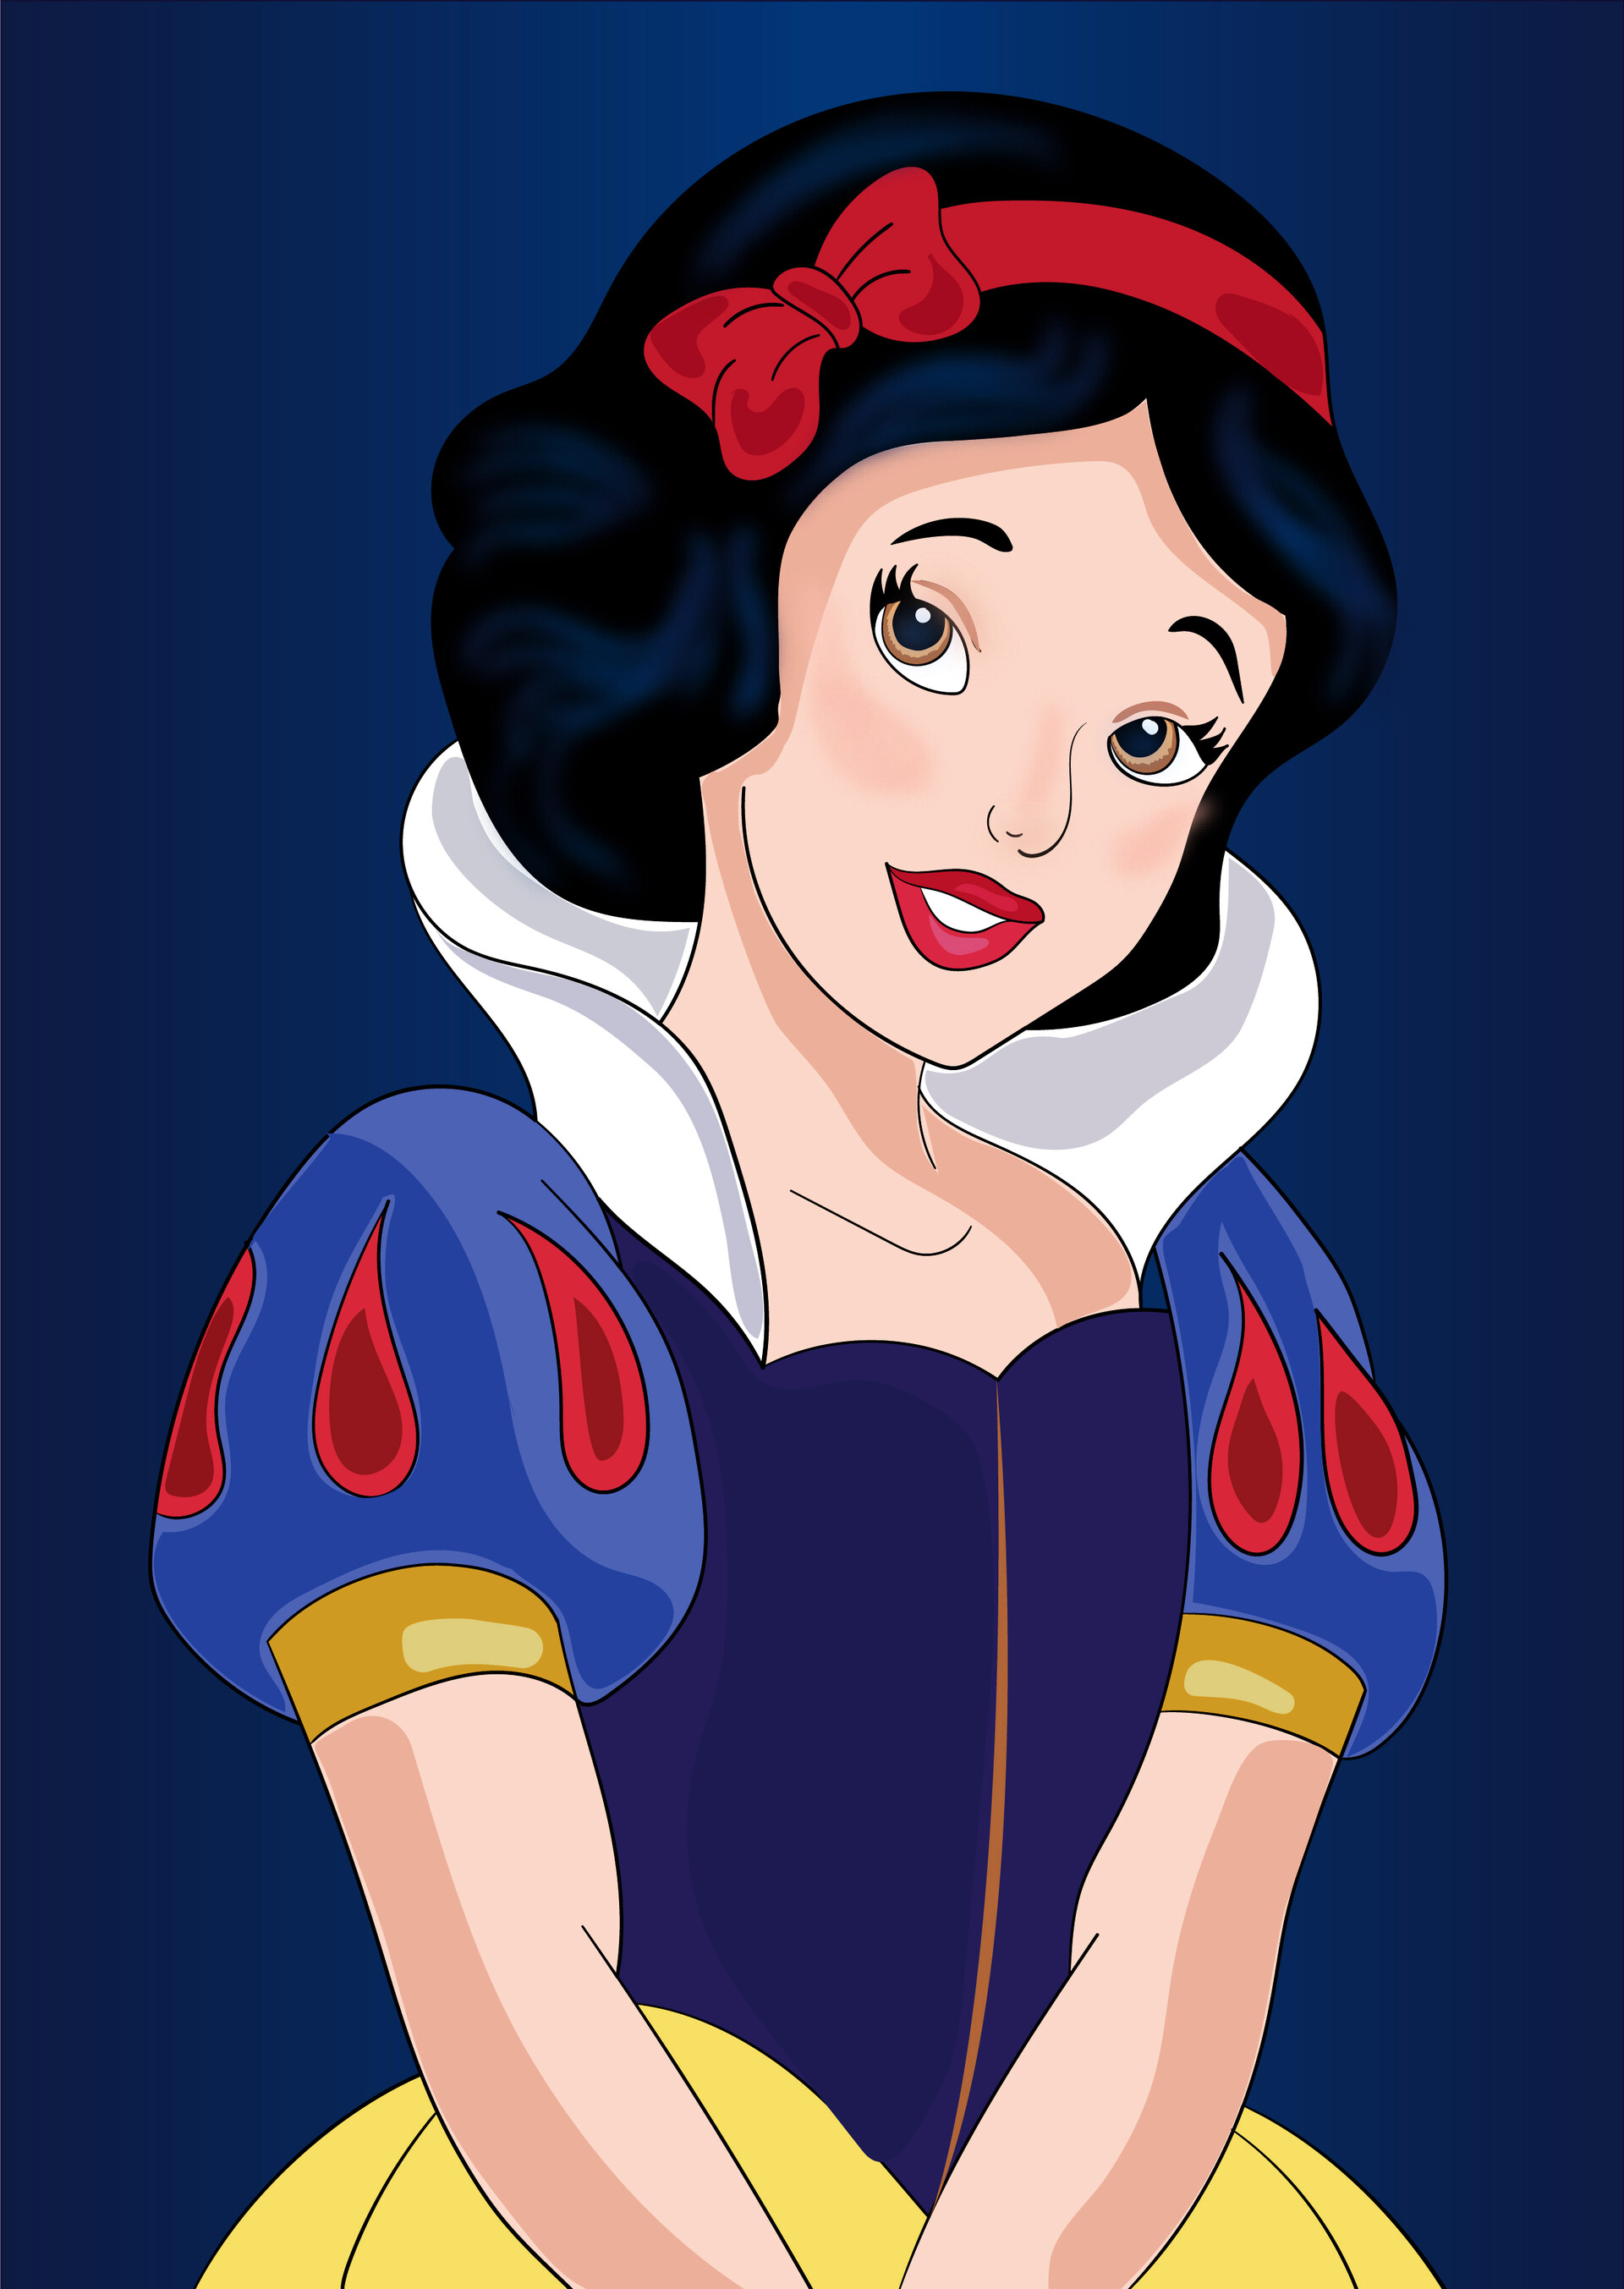 Disney now developing live-action Snow White, The Independent